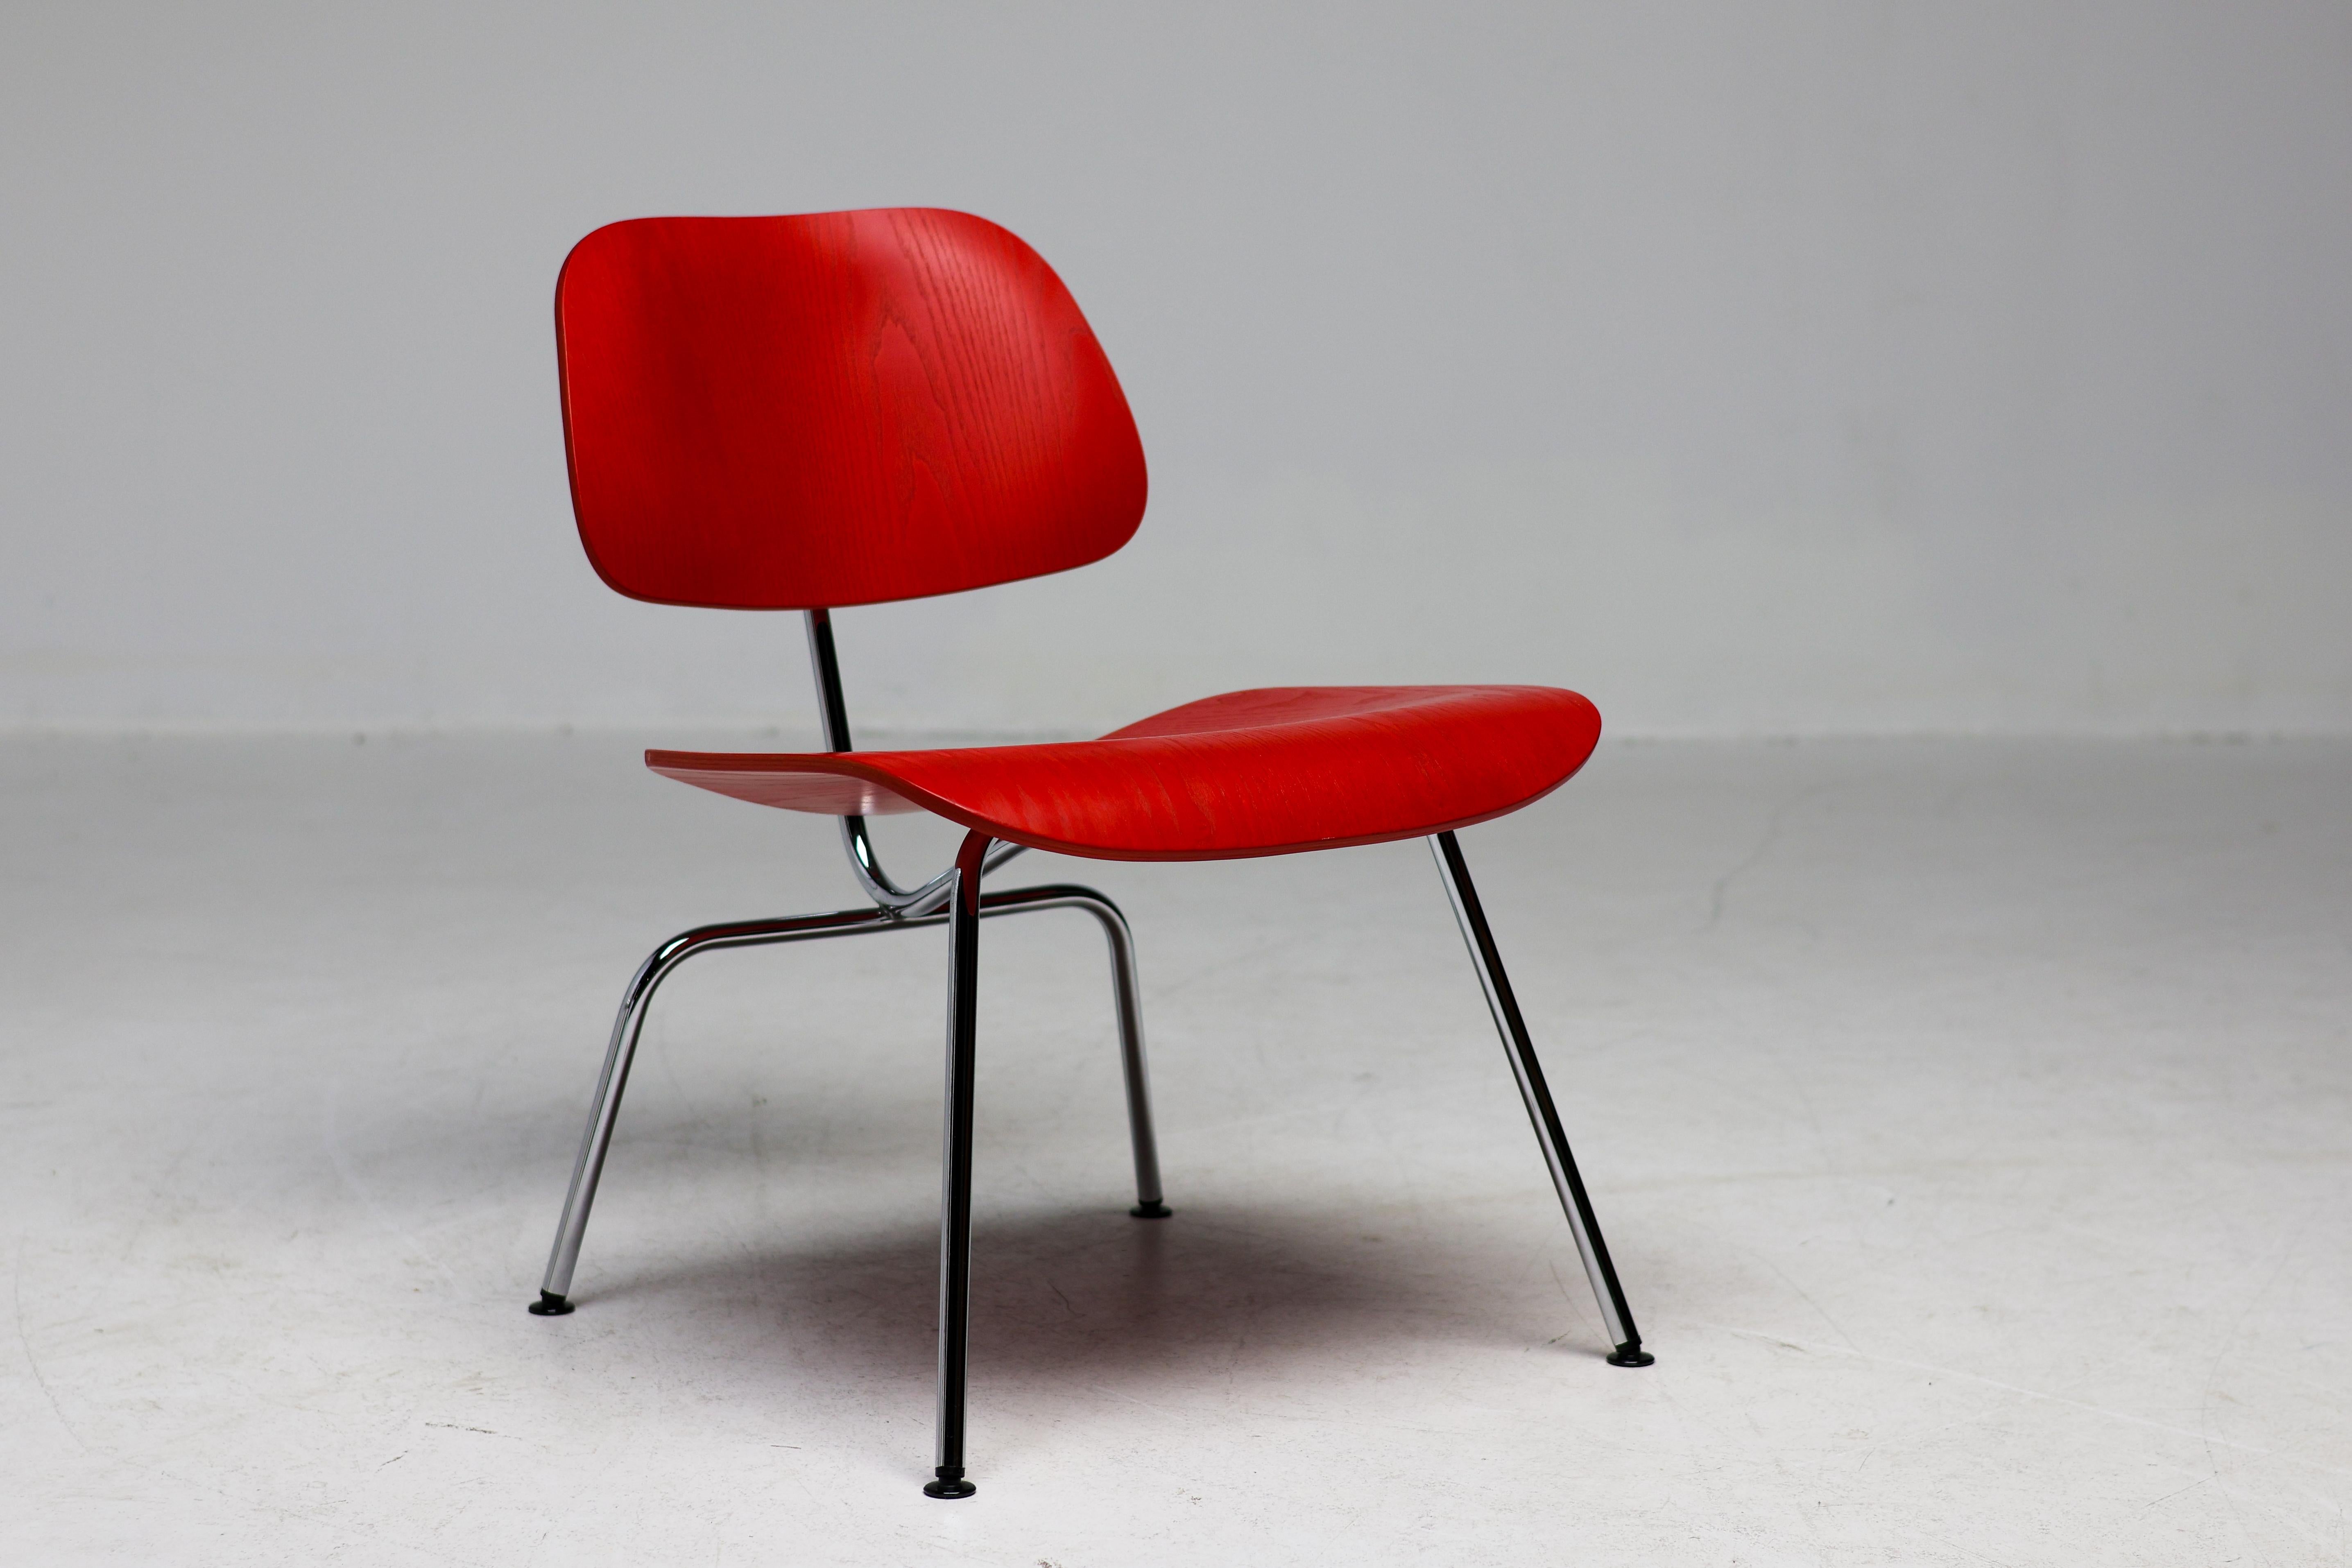 Bright Red LCM chair by Charles and Ray Eames for Vitra 1